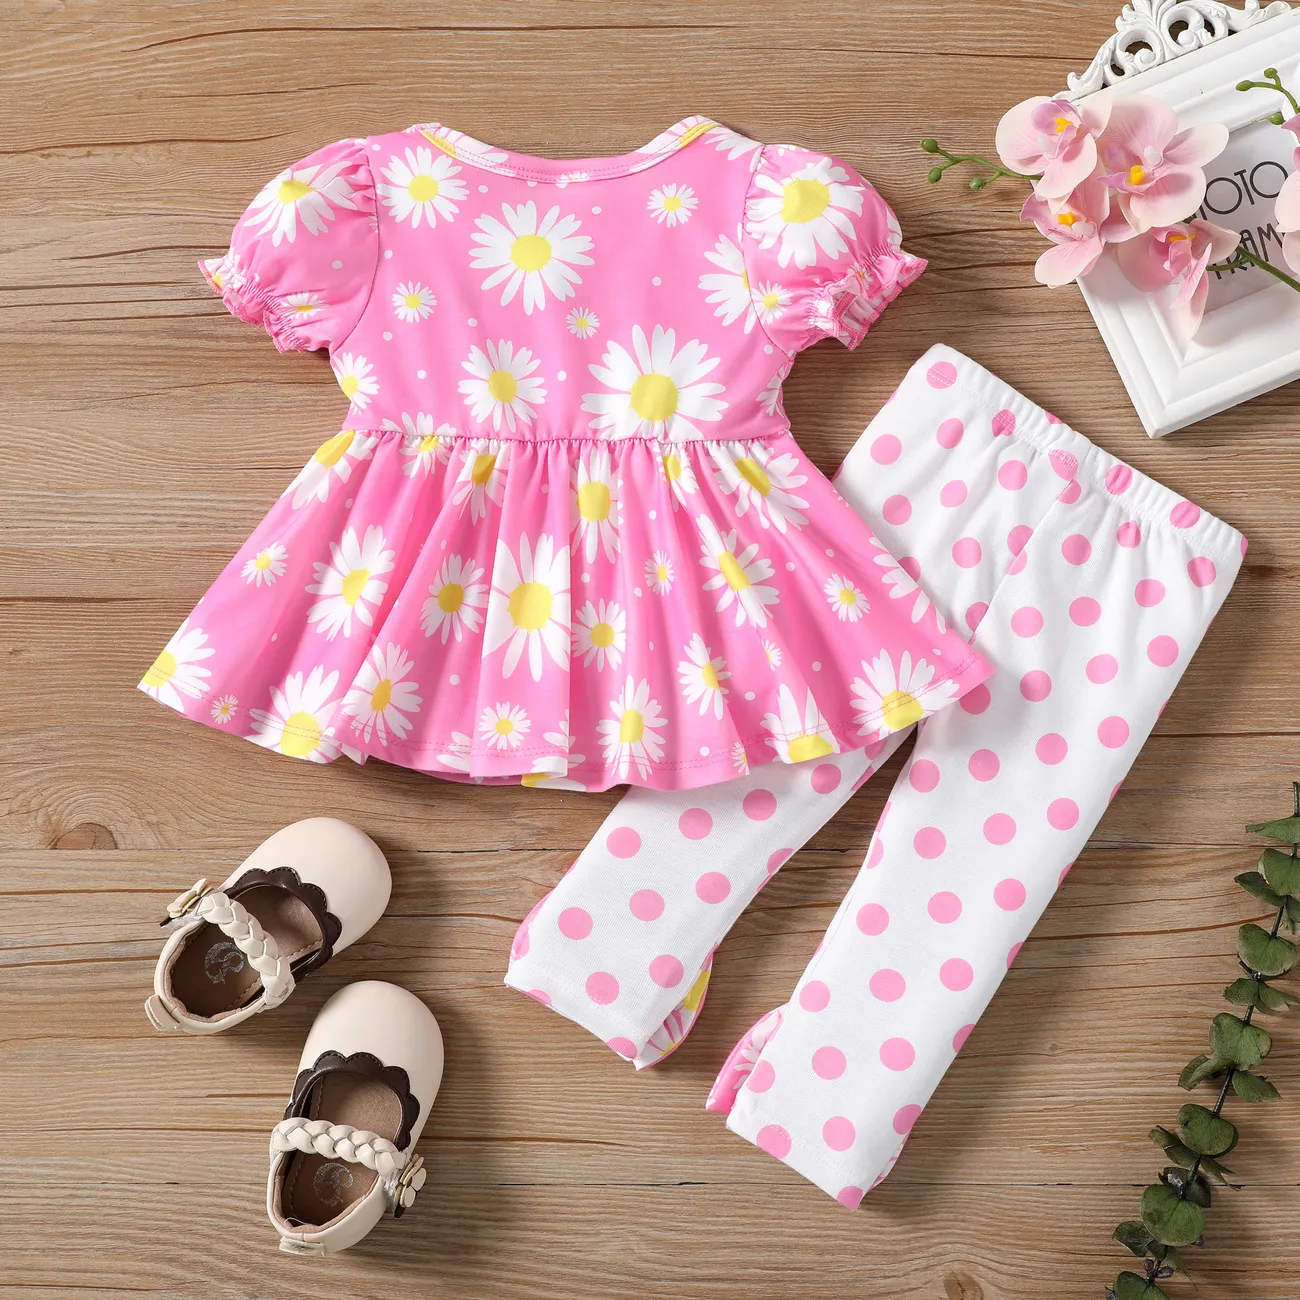 Baby/Toddler Girl 2 pz Puff-sleeve Stampa Floreale Top e Pois Stampa Leggings Set Rosa big image 1